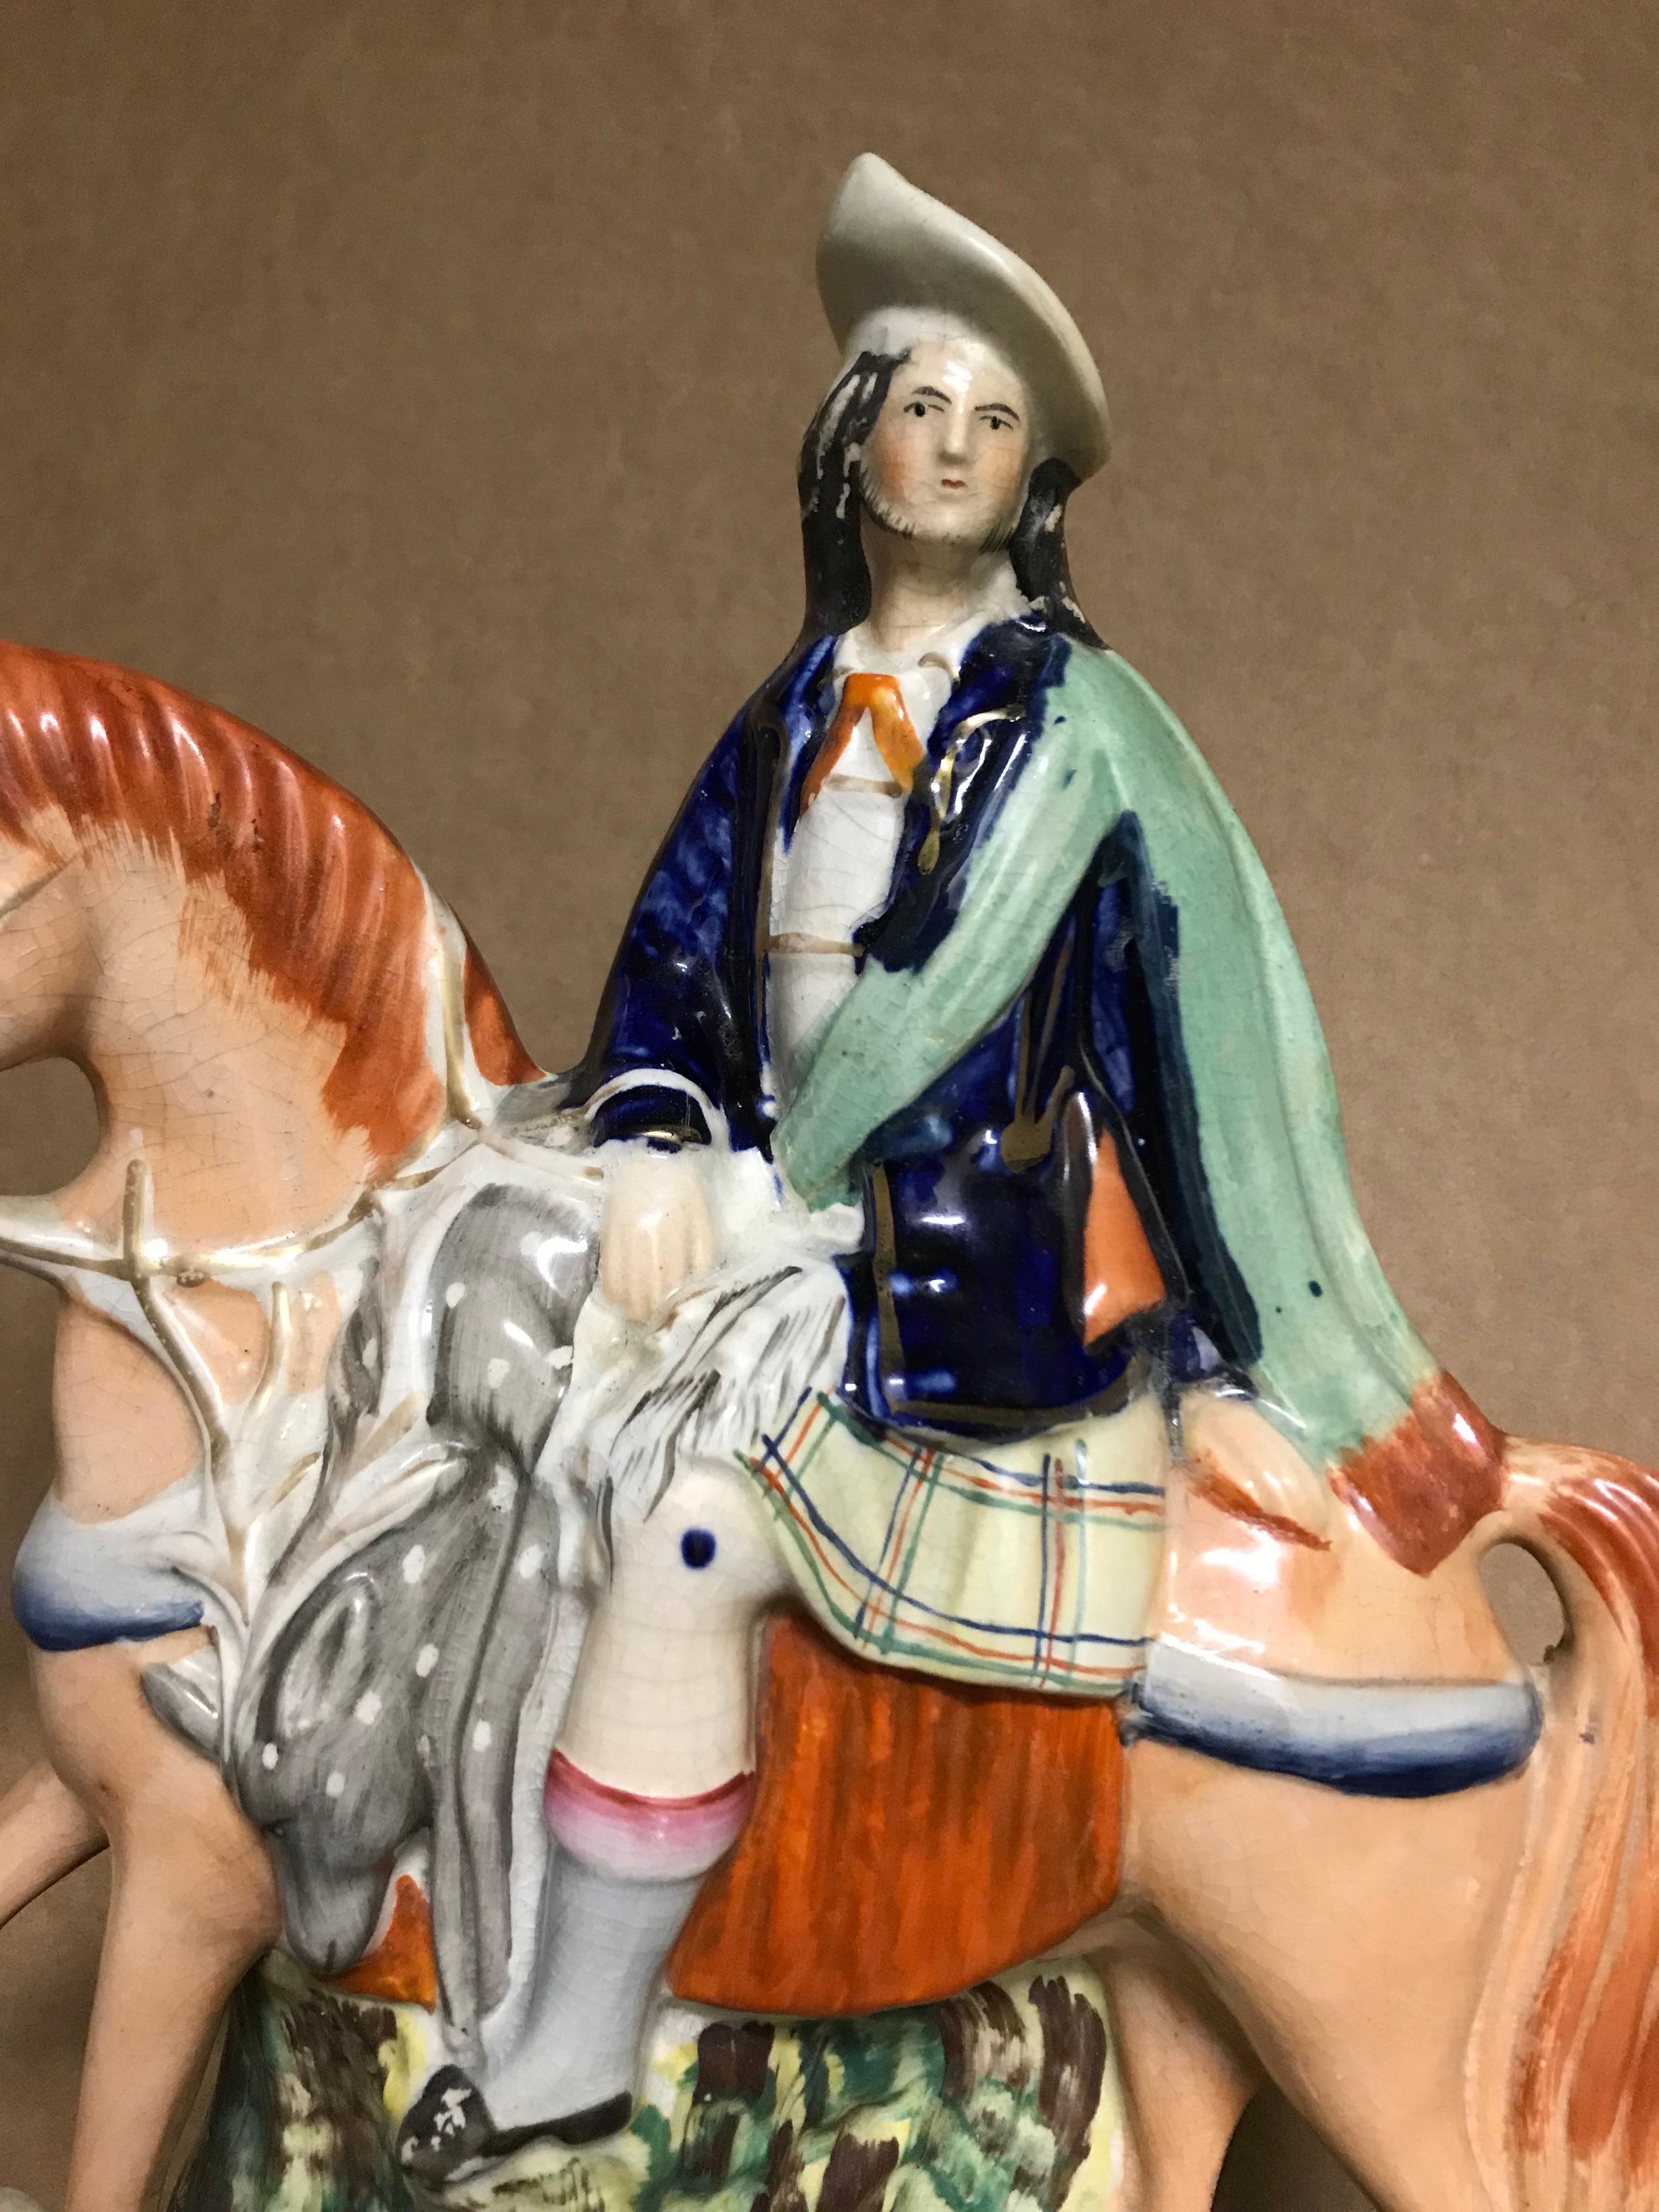 Beautifully painted and impressive scale Staffordshire group of a hunter dressed in Scottish plaid kilt riding back from the hunt with his quarry, a stag draped over the horse. I love the naive depiction of real life, and the charming face horse has